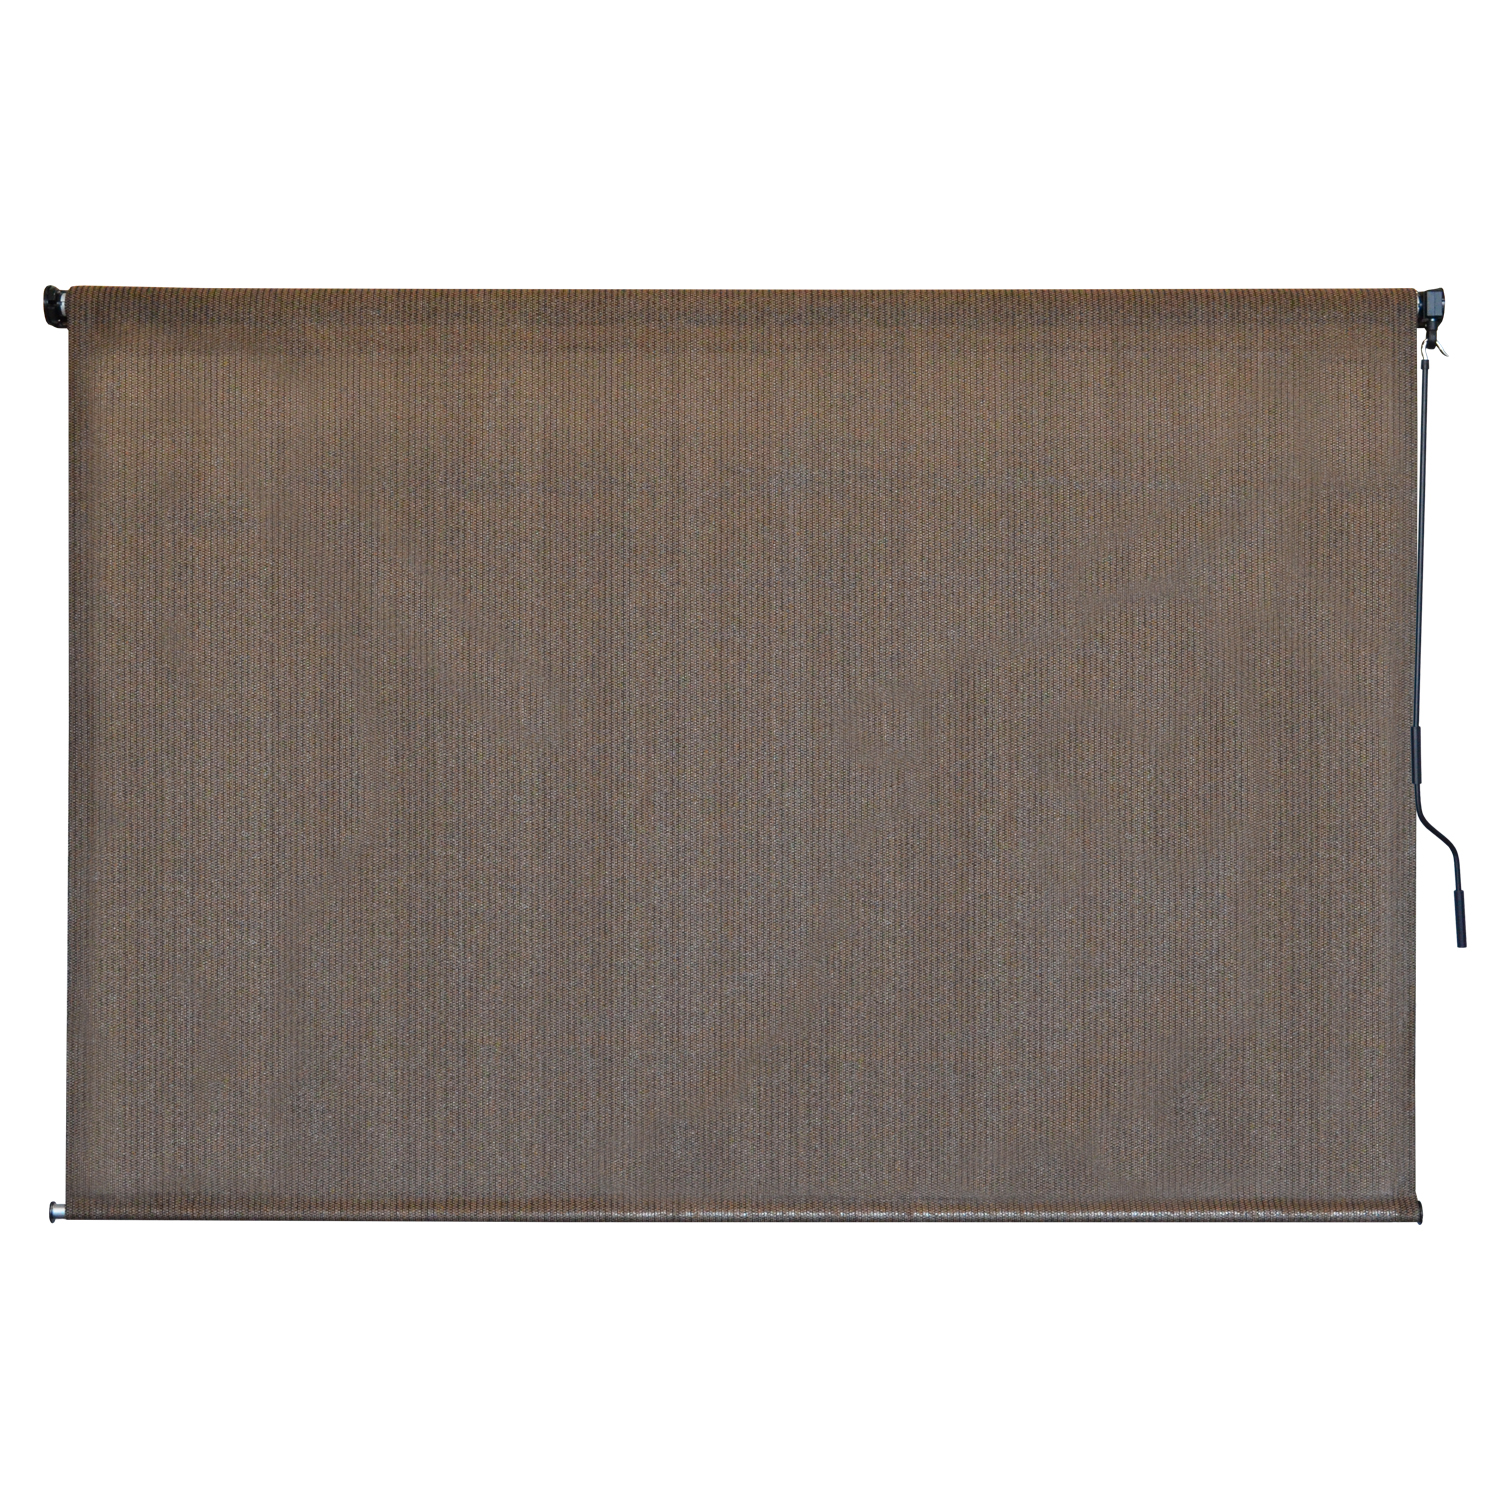 P7220 96x 72 In. Outdoor Cordless Sun Shade, Cabo Sand